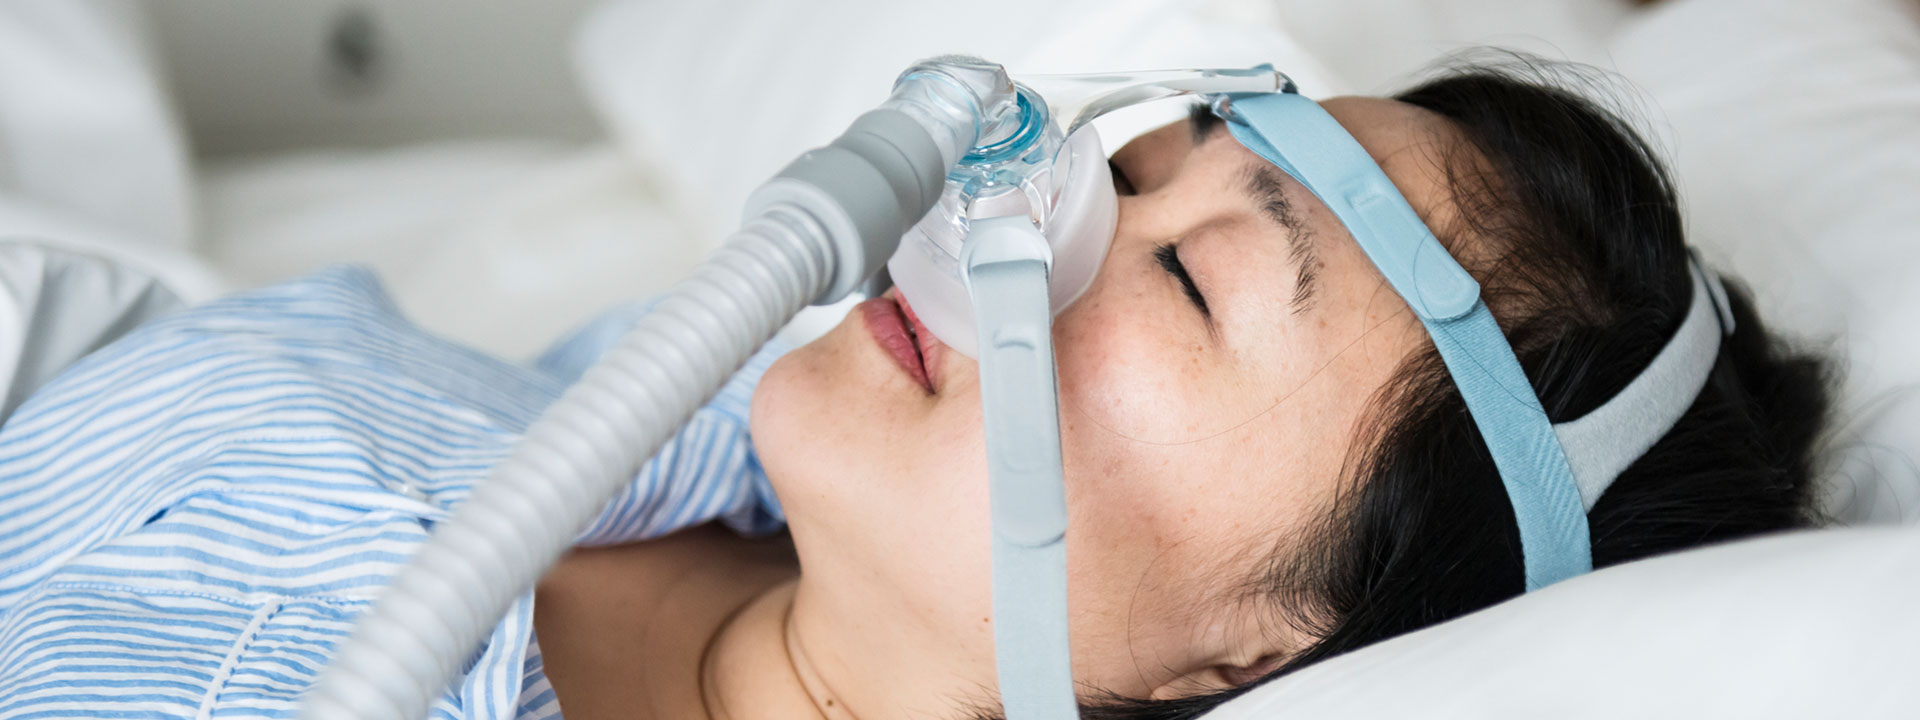 Things to note about different CPAP masks